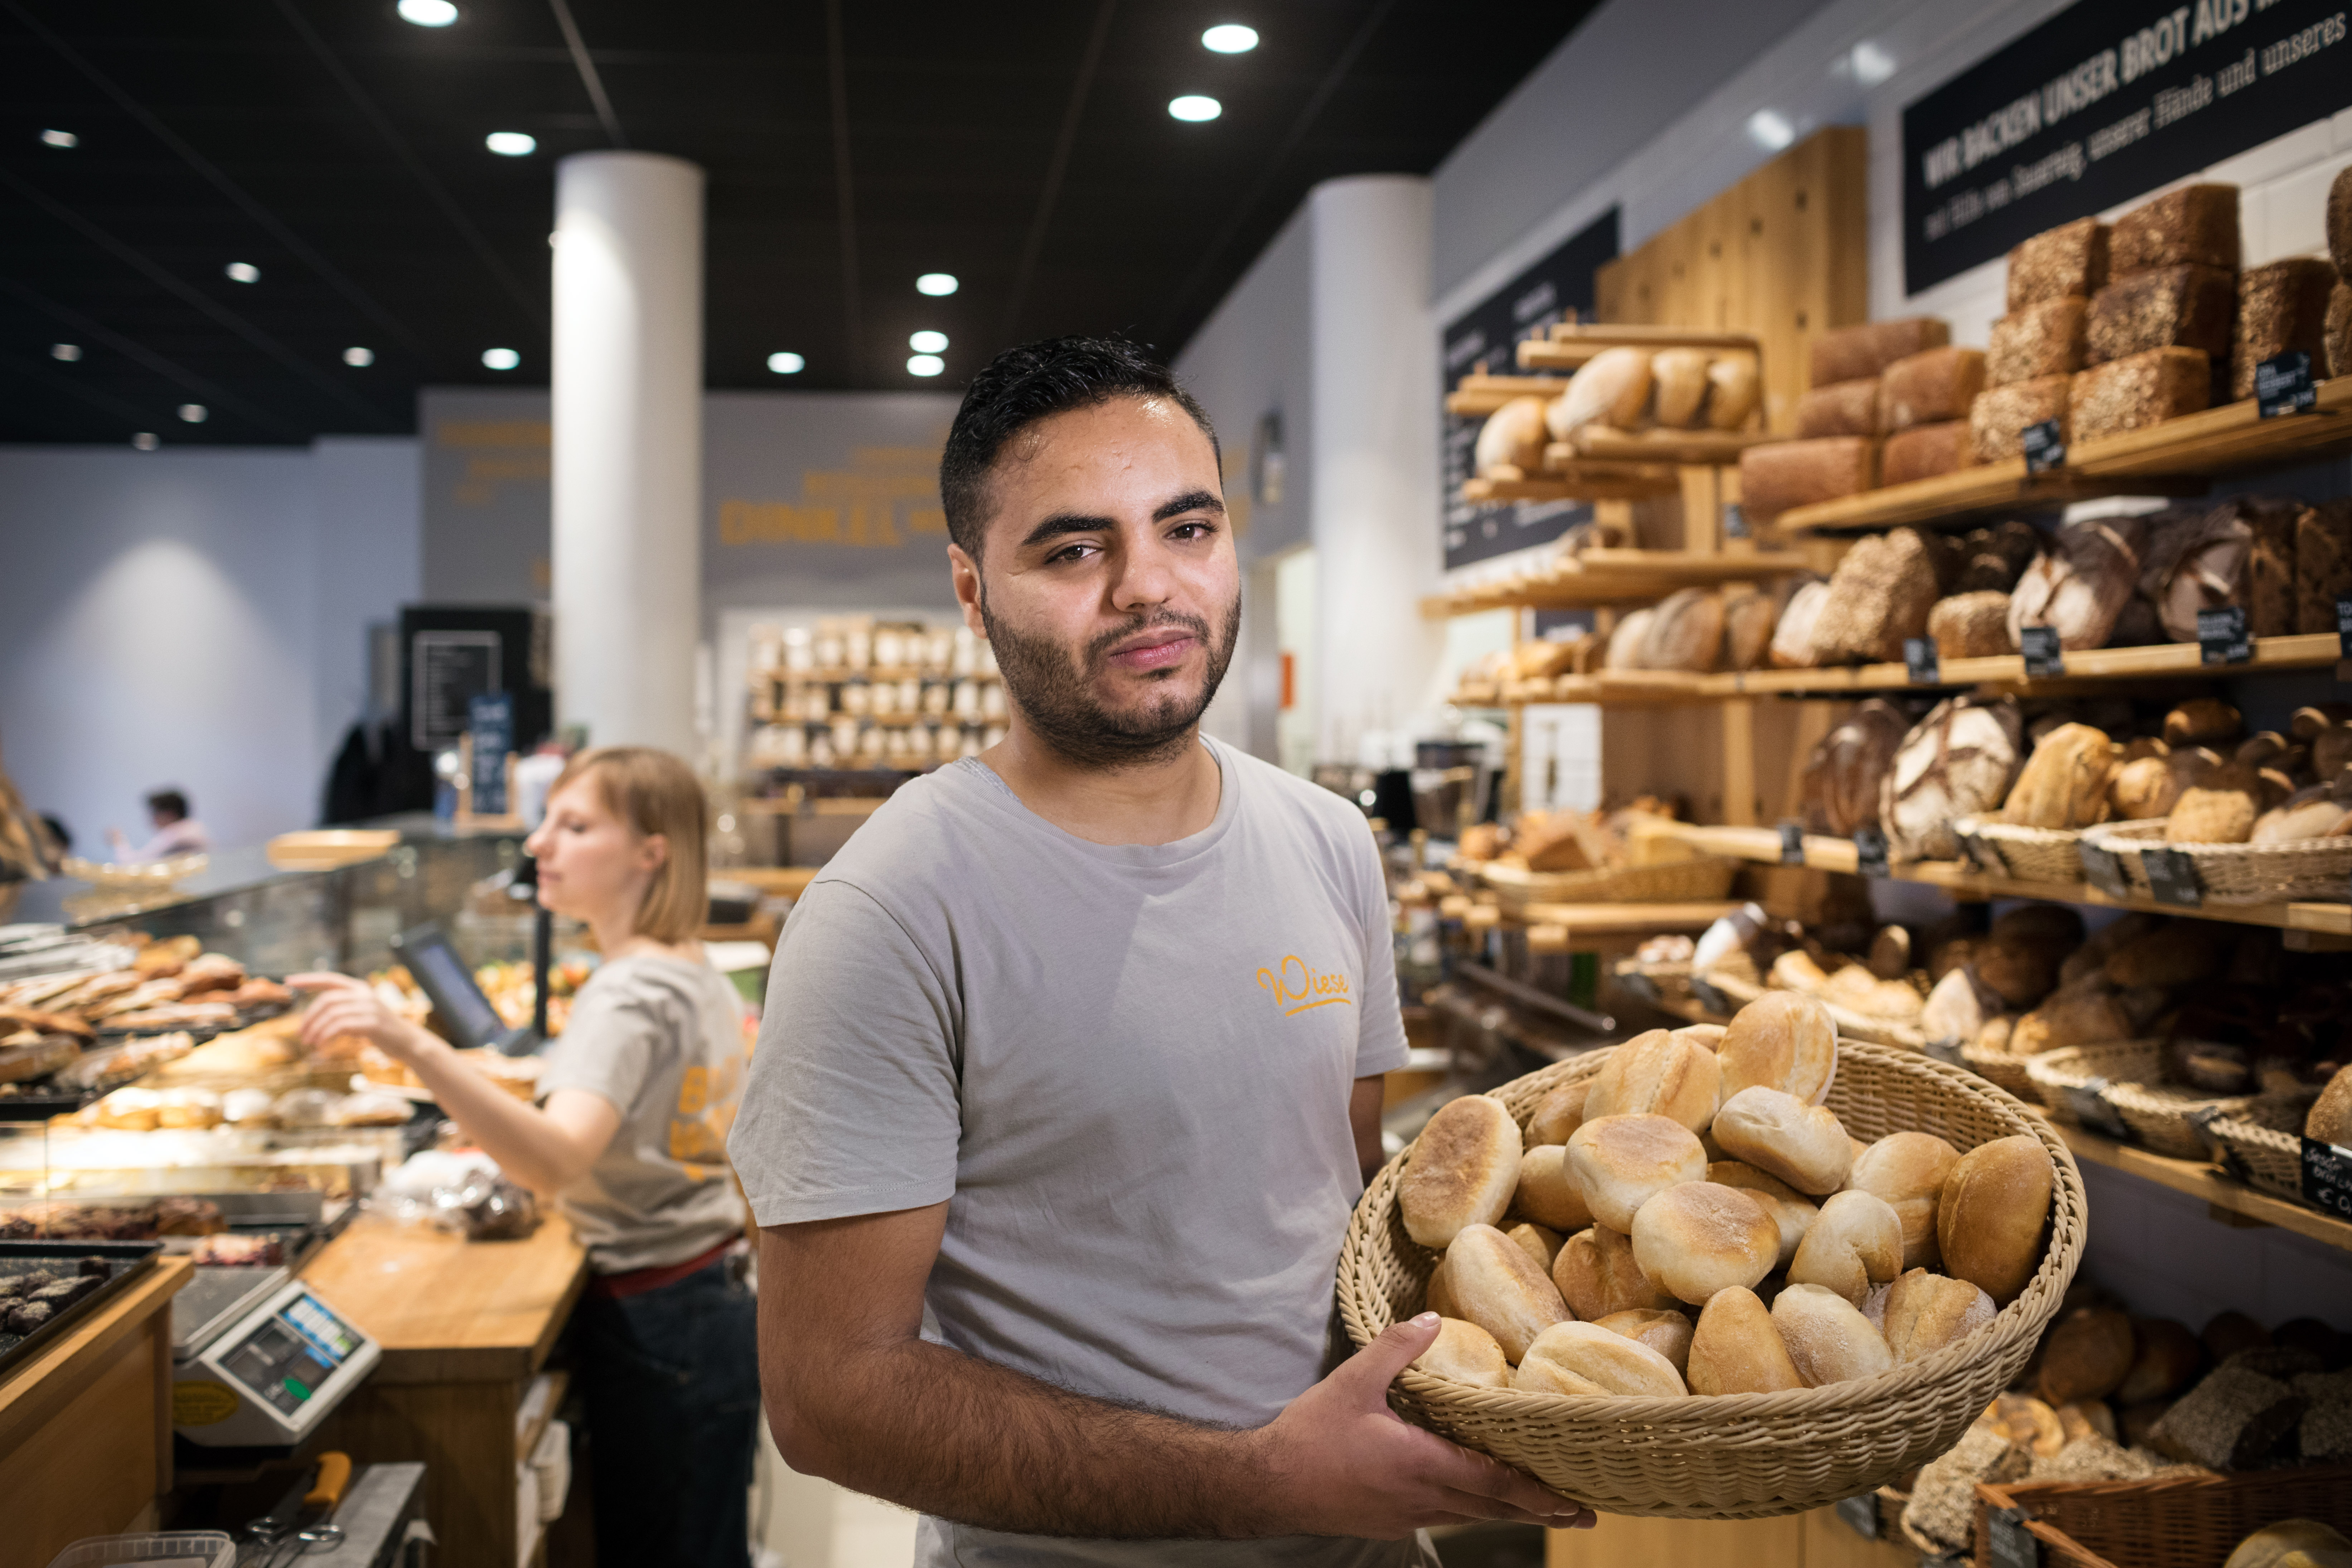 A man in a bakery displays a basket of bread.